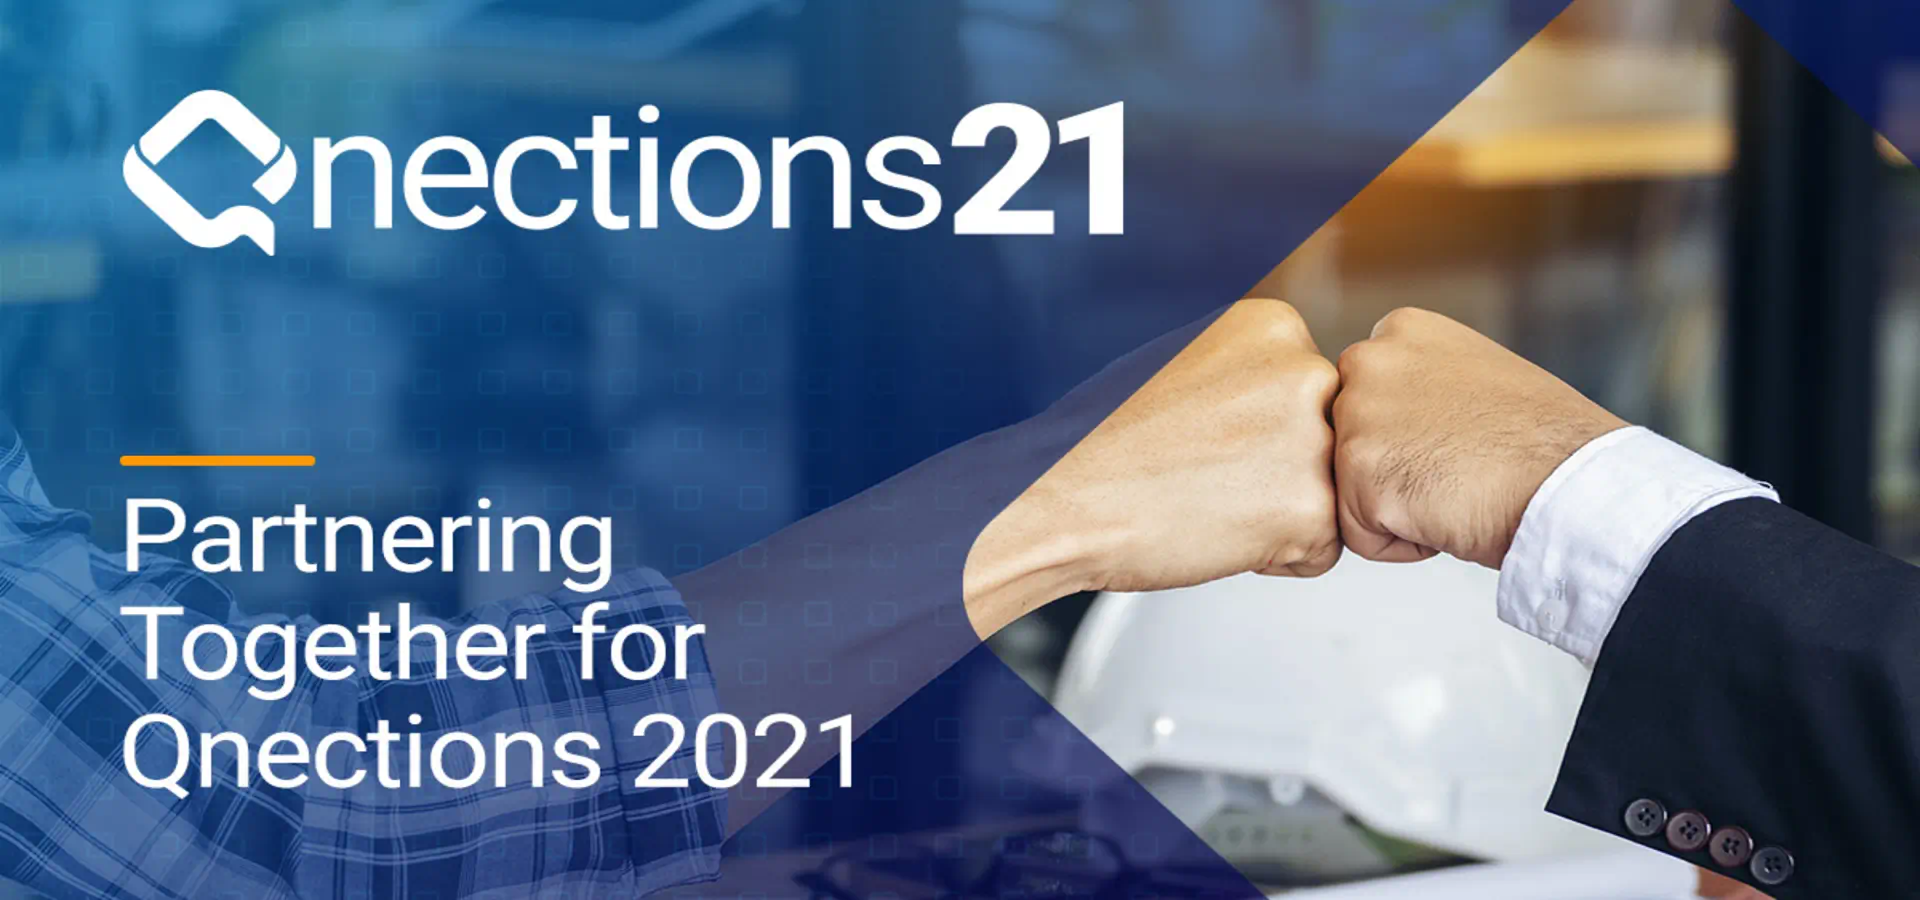 Partnering Together For Qnections 2021 - About Quorum